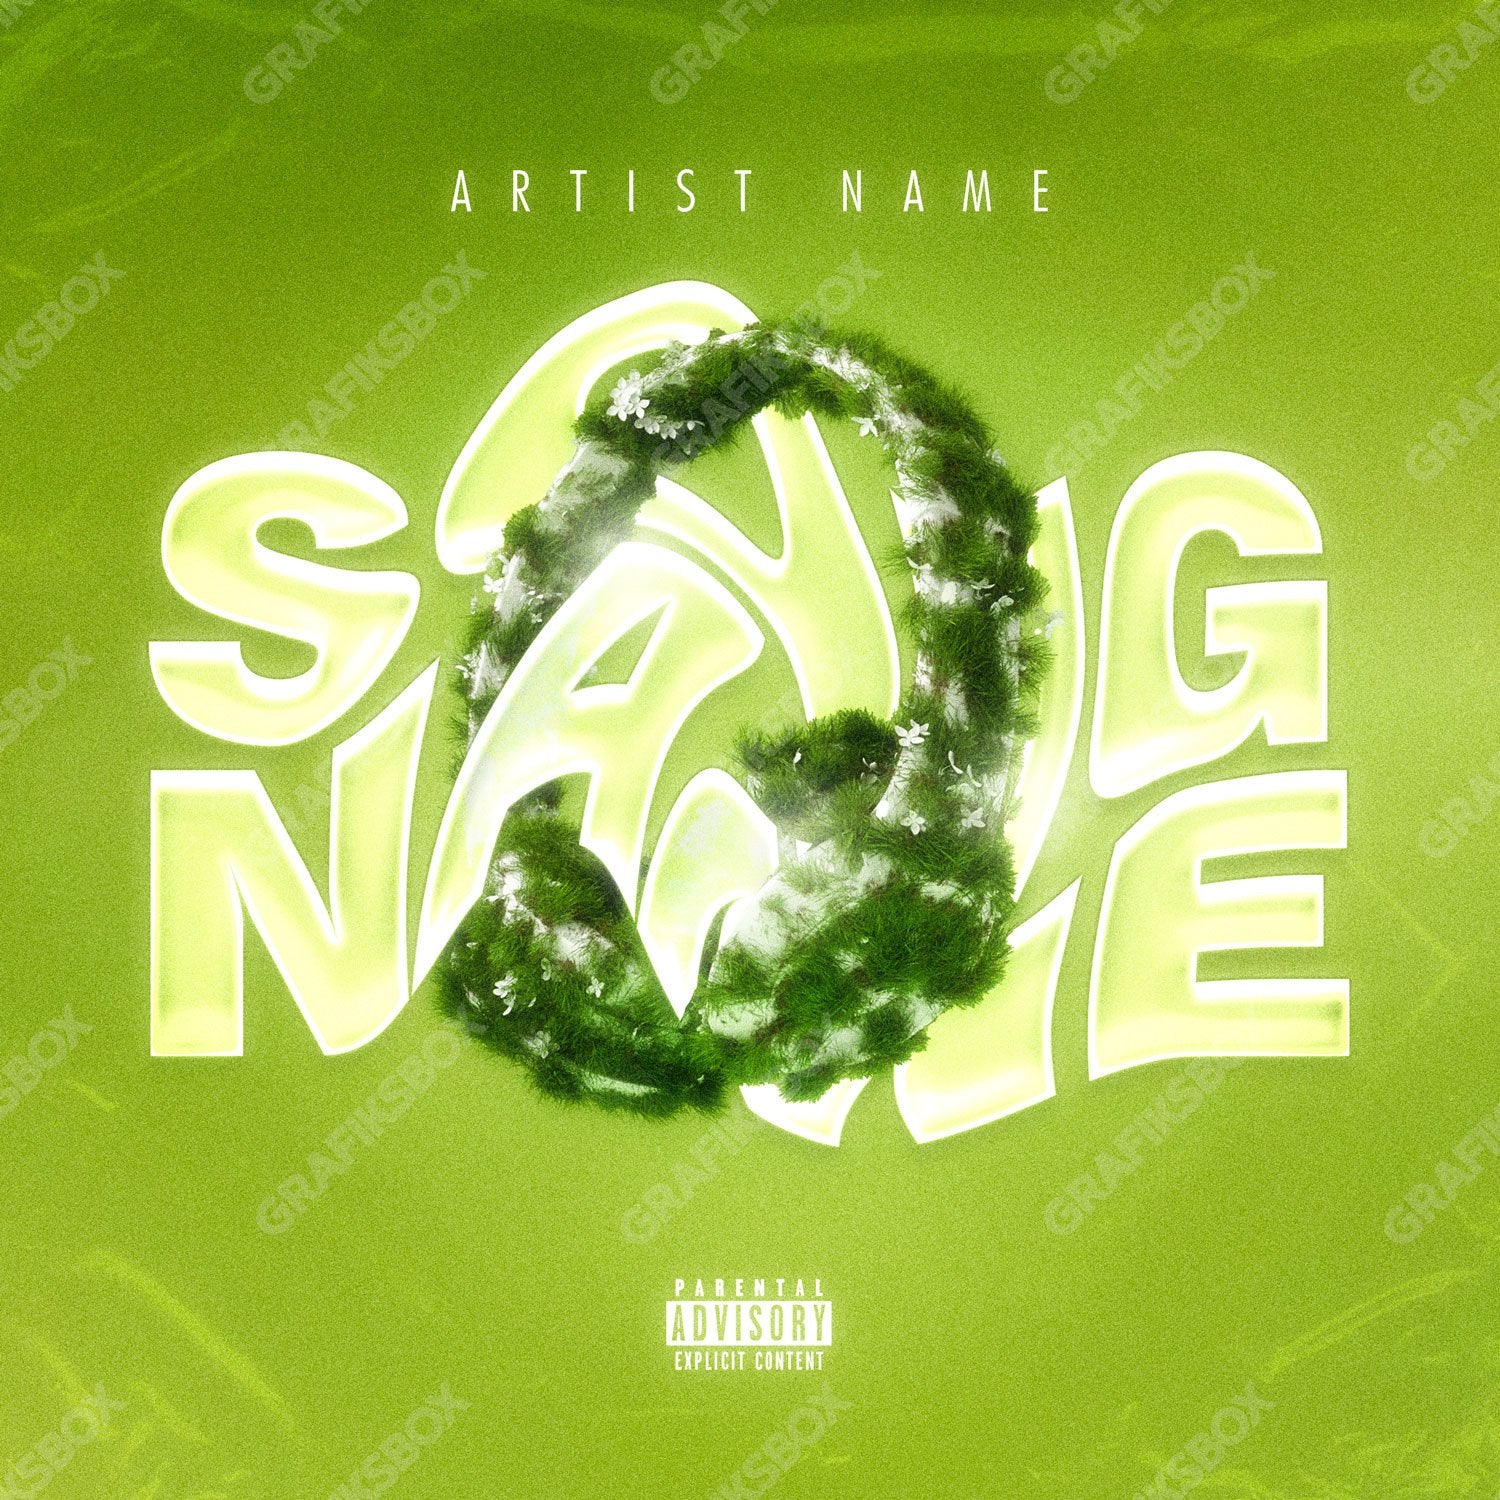 Natural Music premade cover art